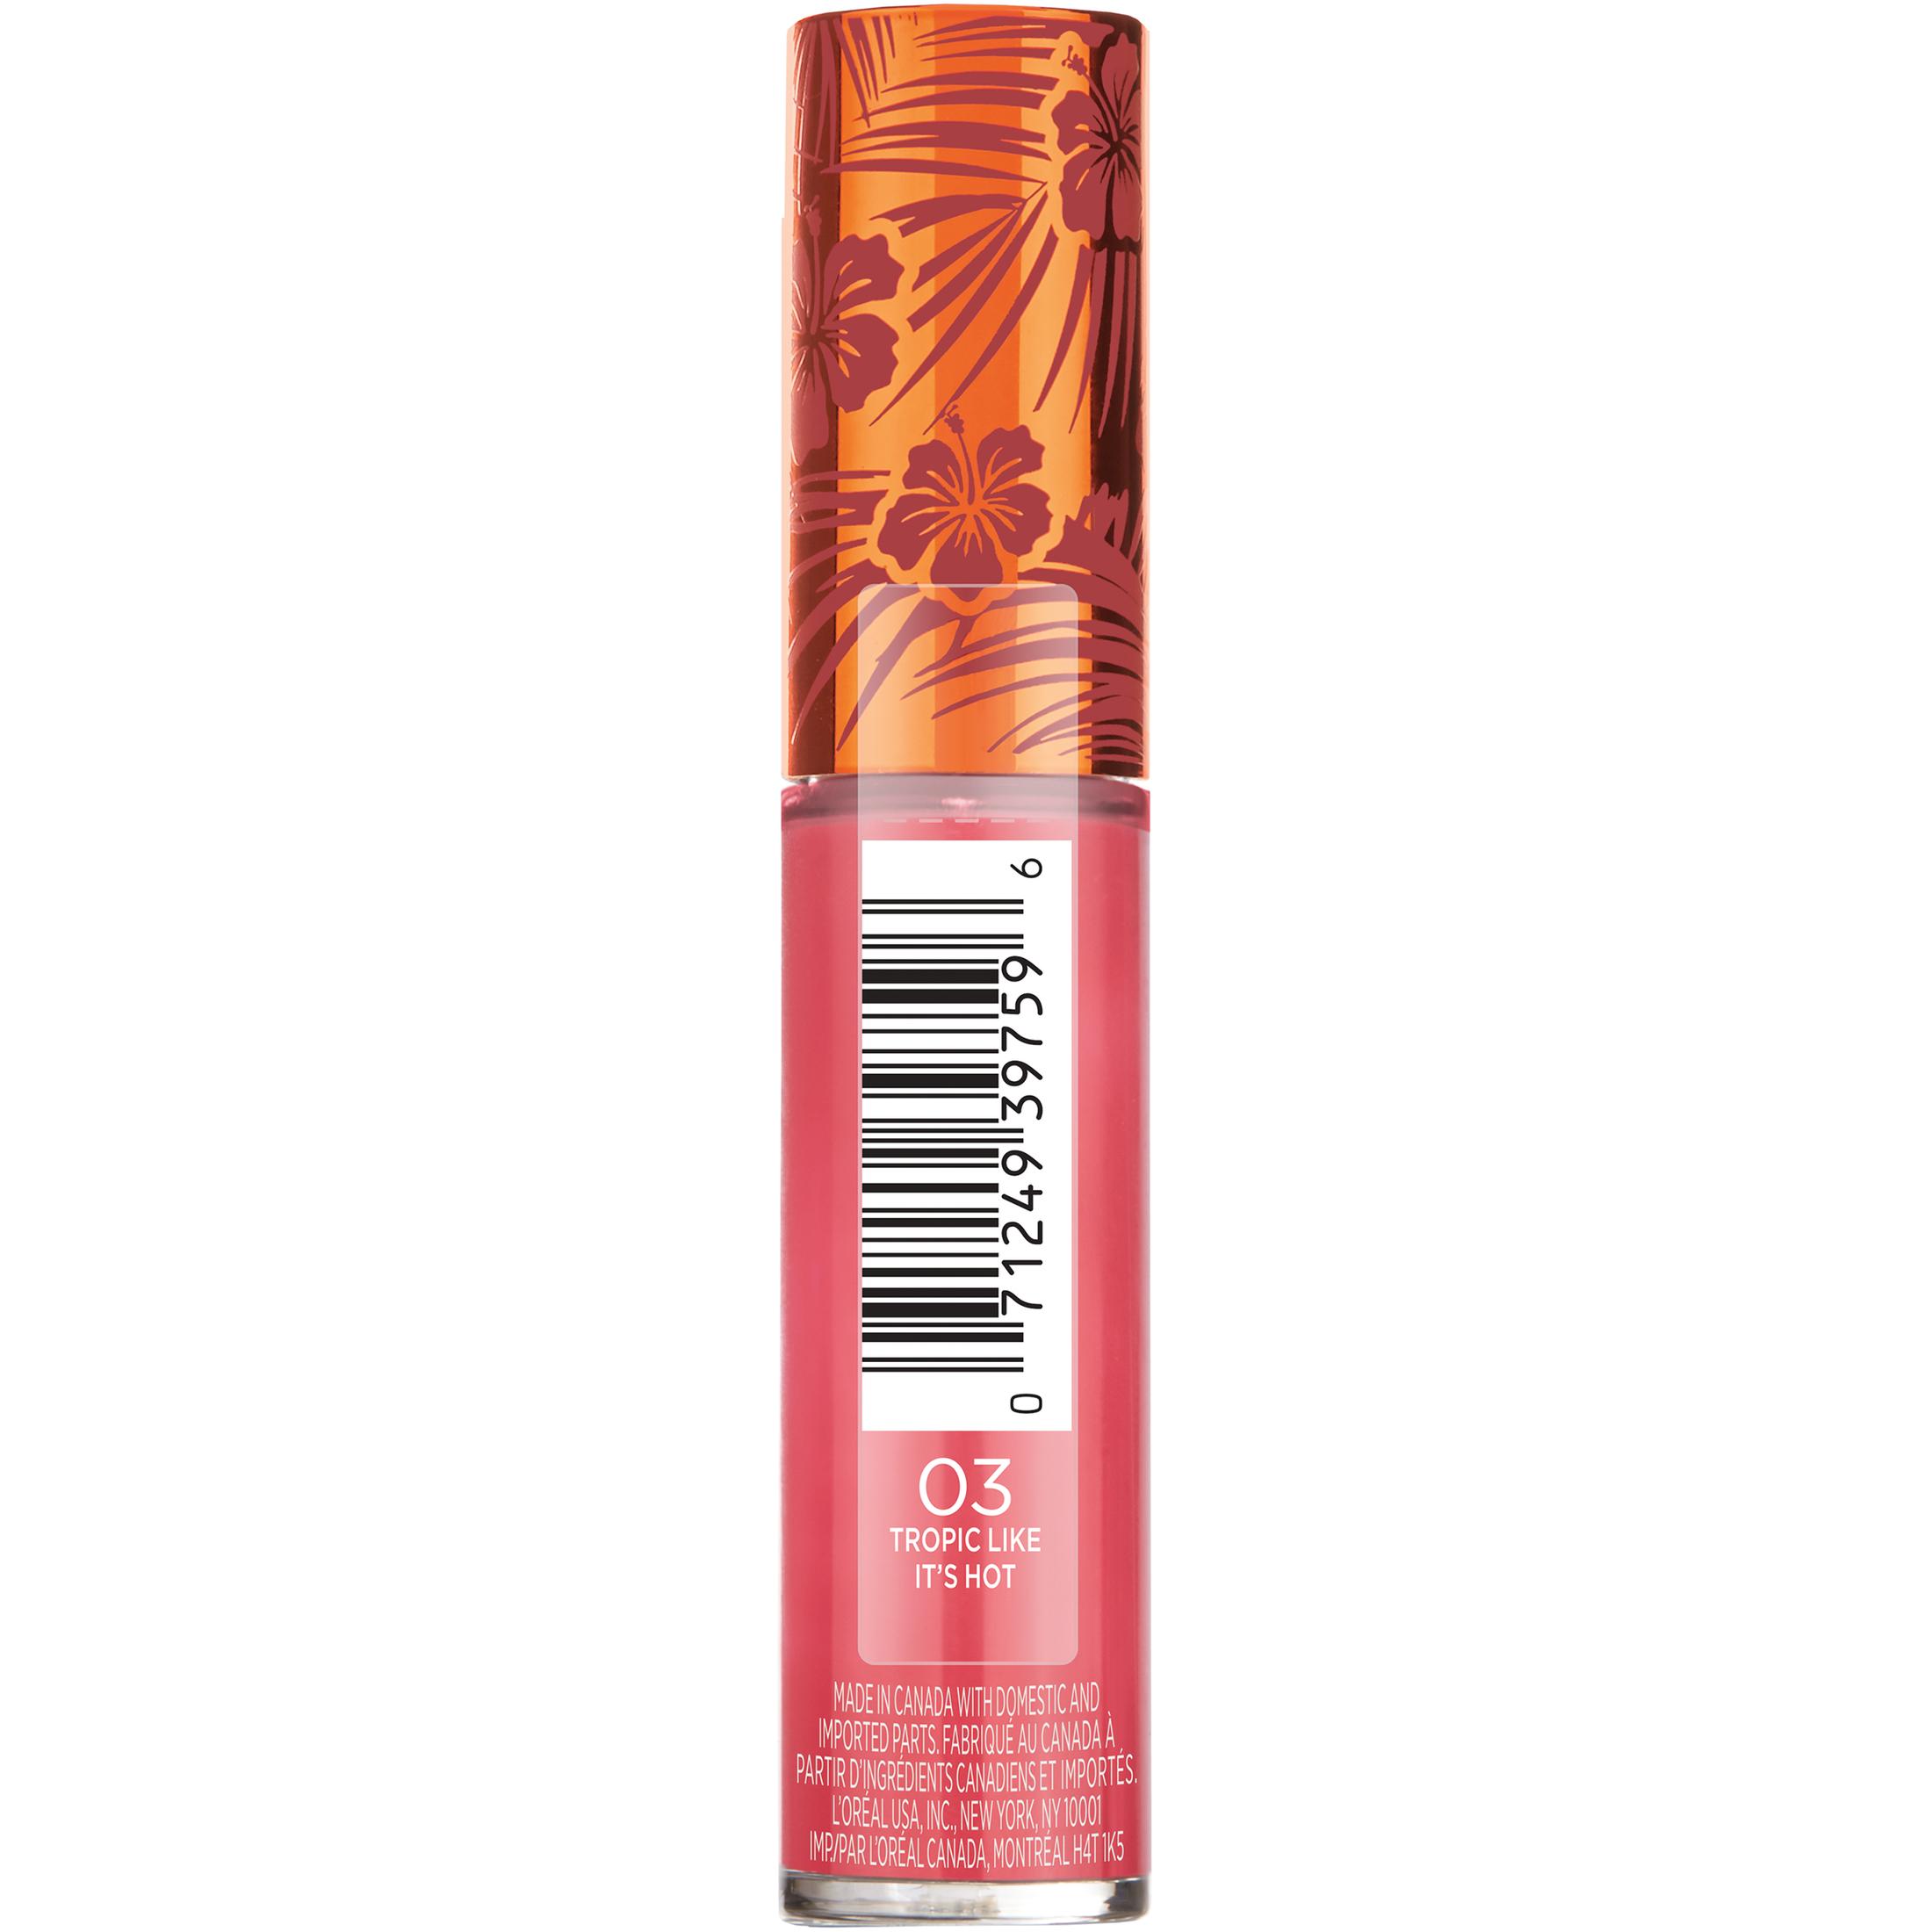 L'Oreal Paris Makeup Summer Belle Makeup Collection Glowing Lip Gloss, Tropic Like Its Hot - image 4 of 6